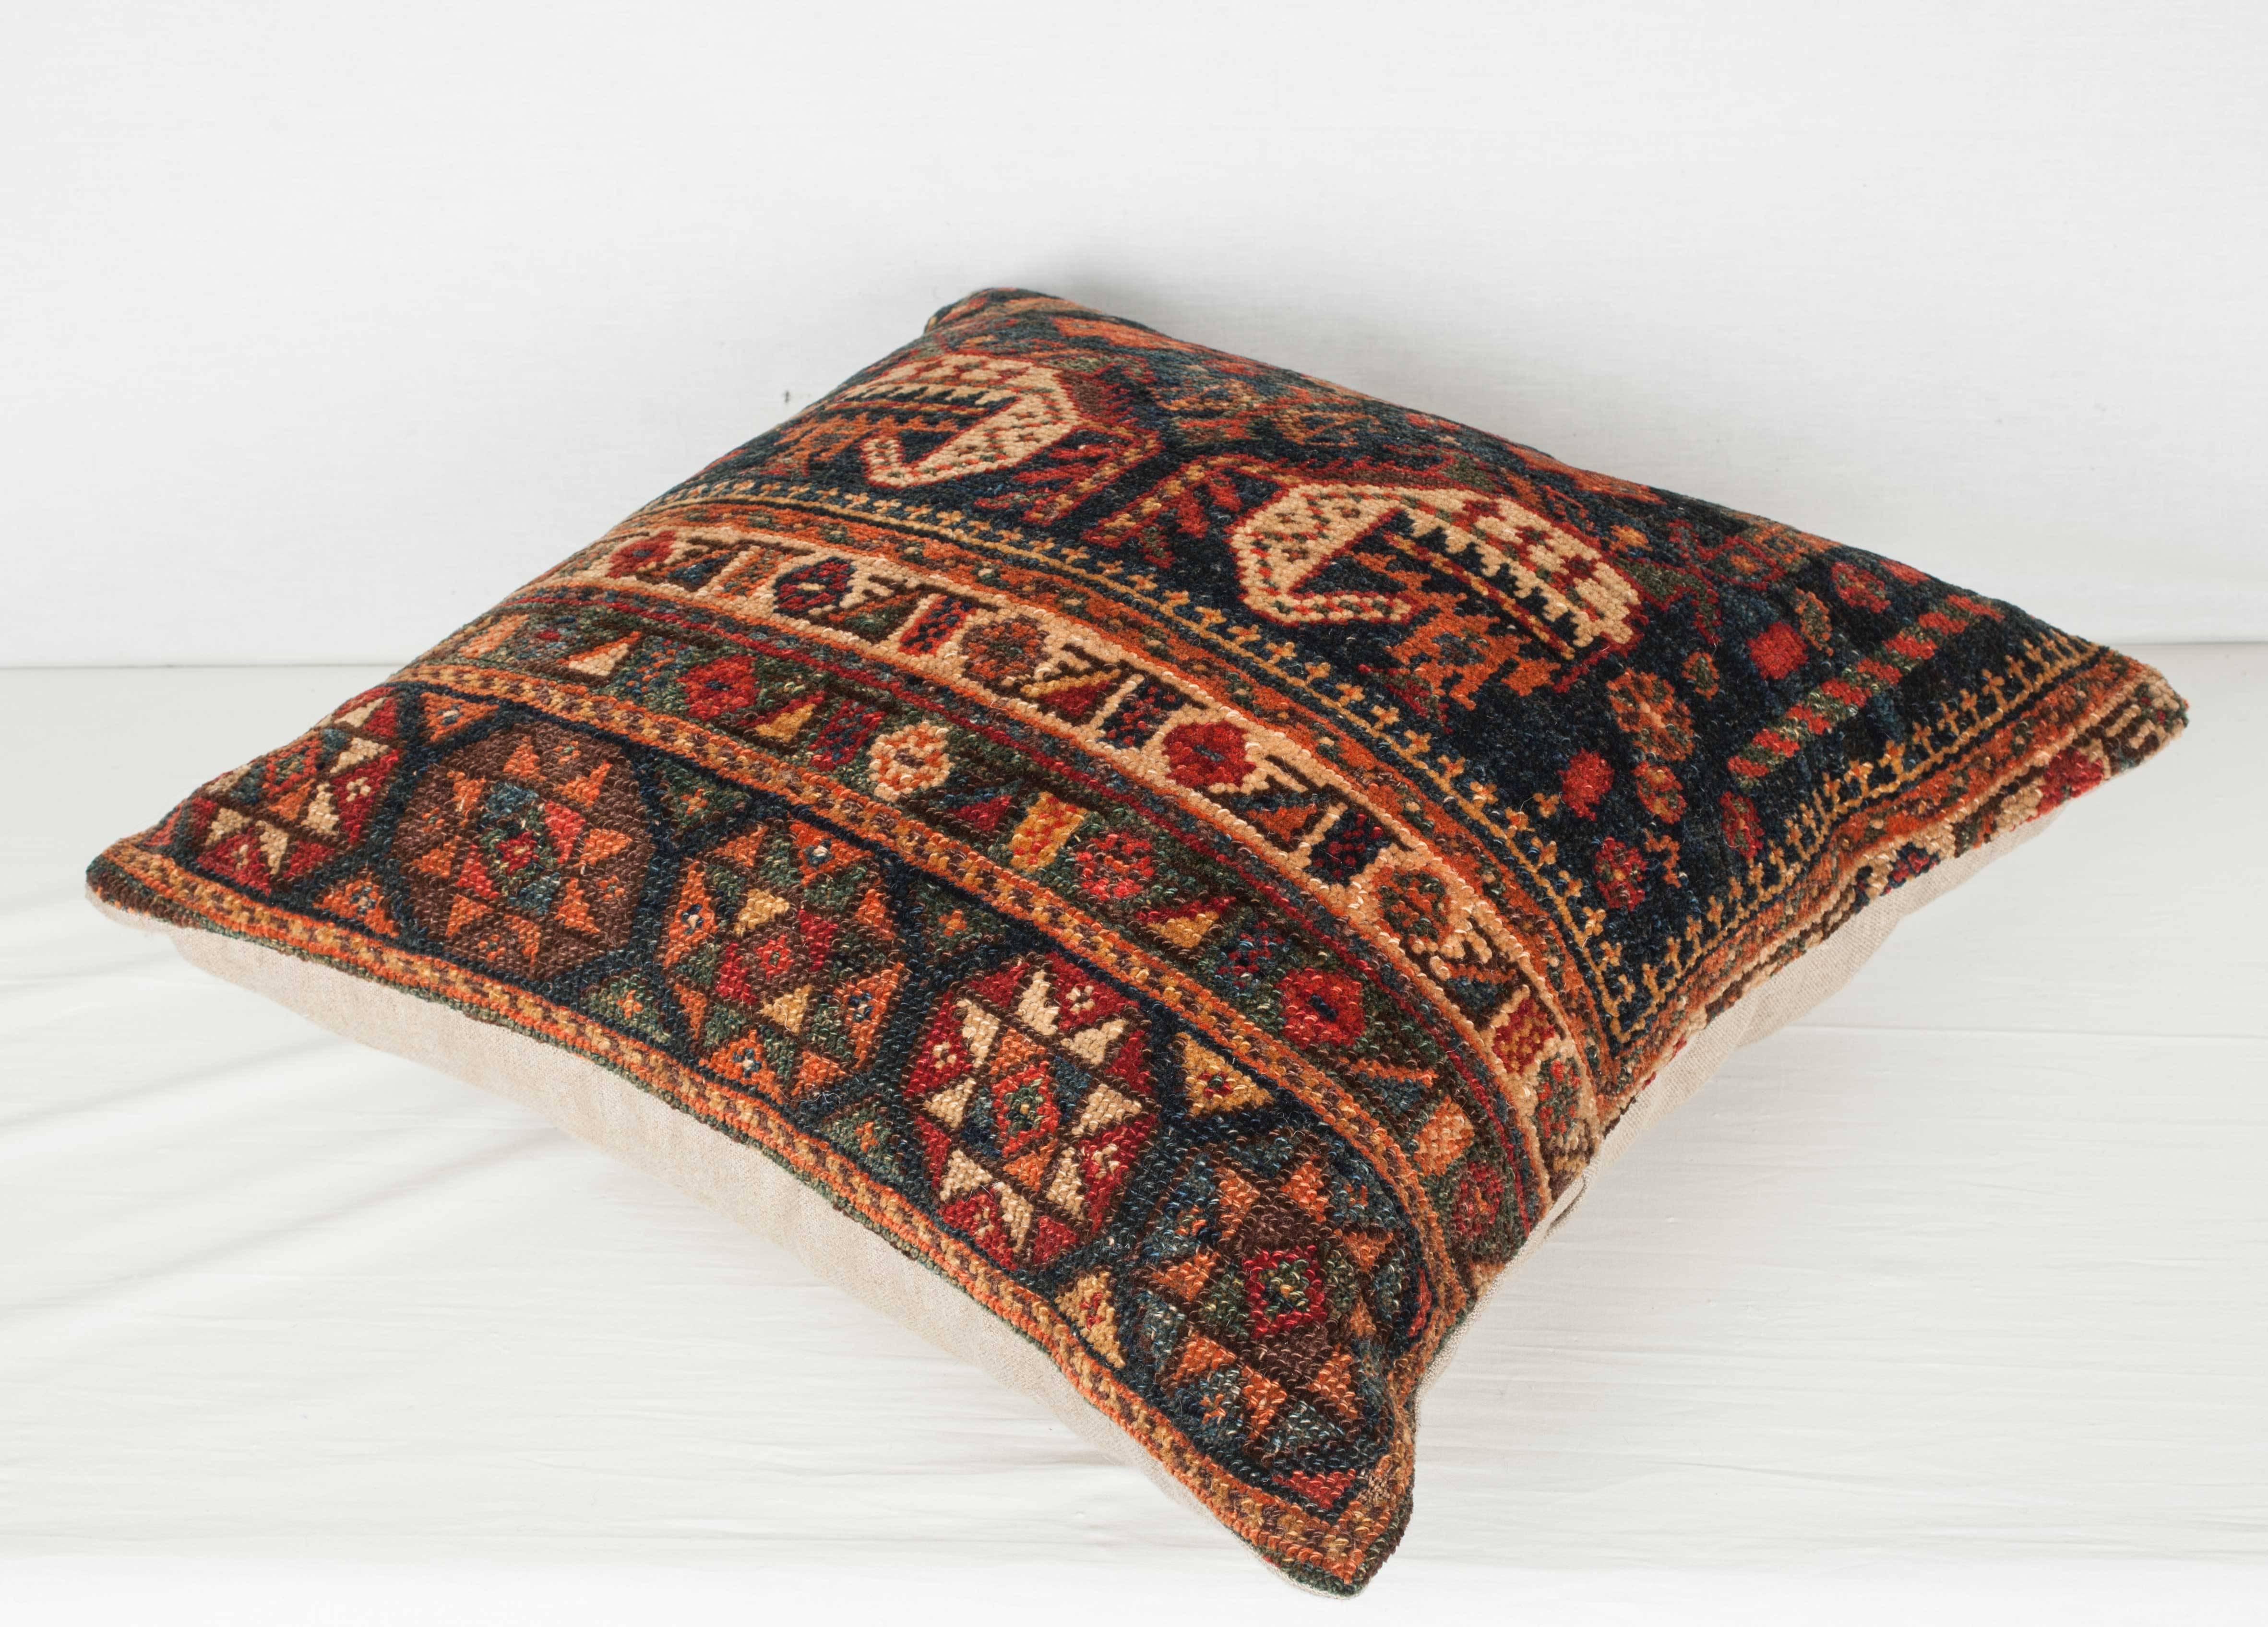 Woven Antique Luri Persian Tribal Pillow For Sale